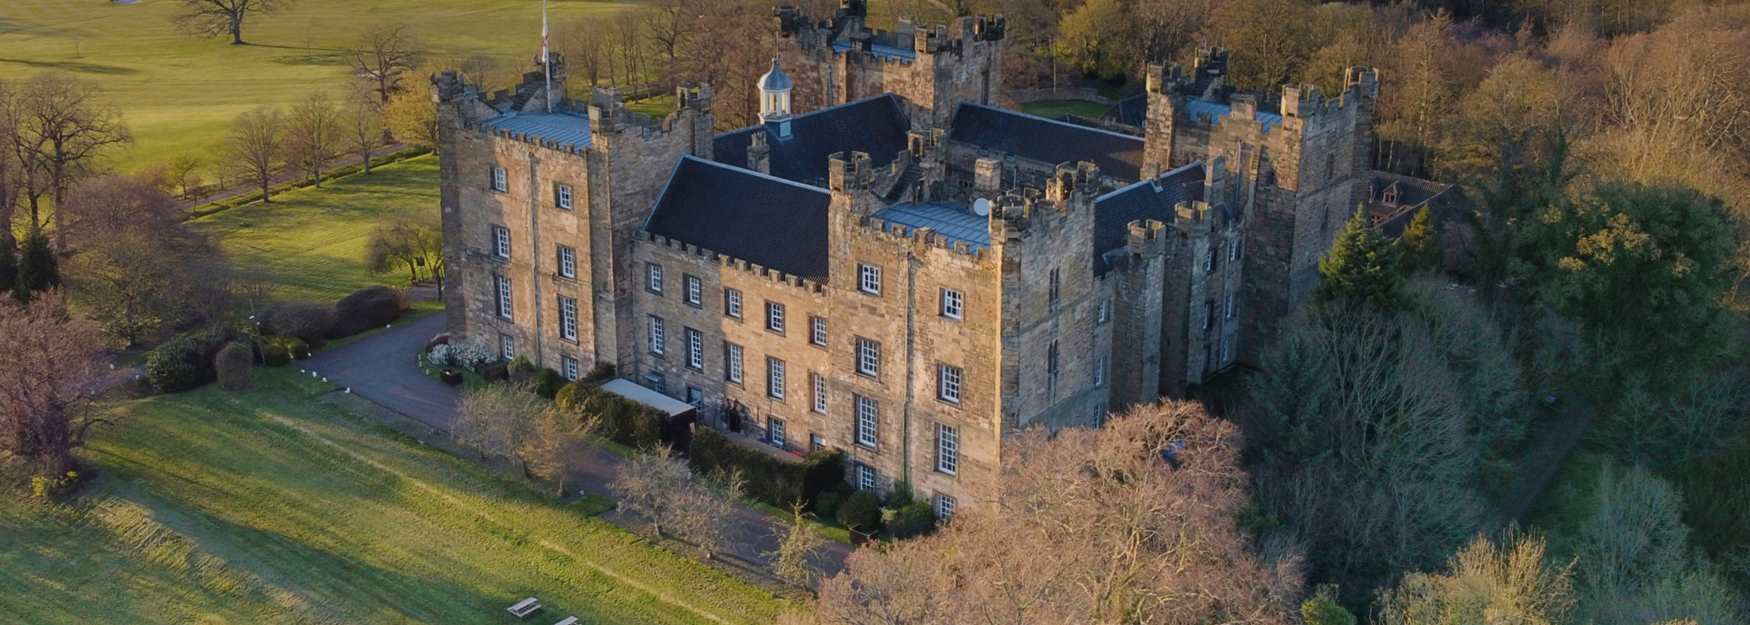 Drone image of Lumley Castle